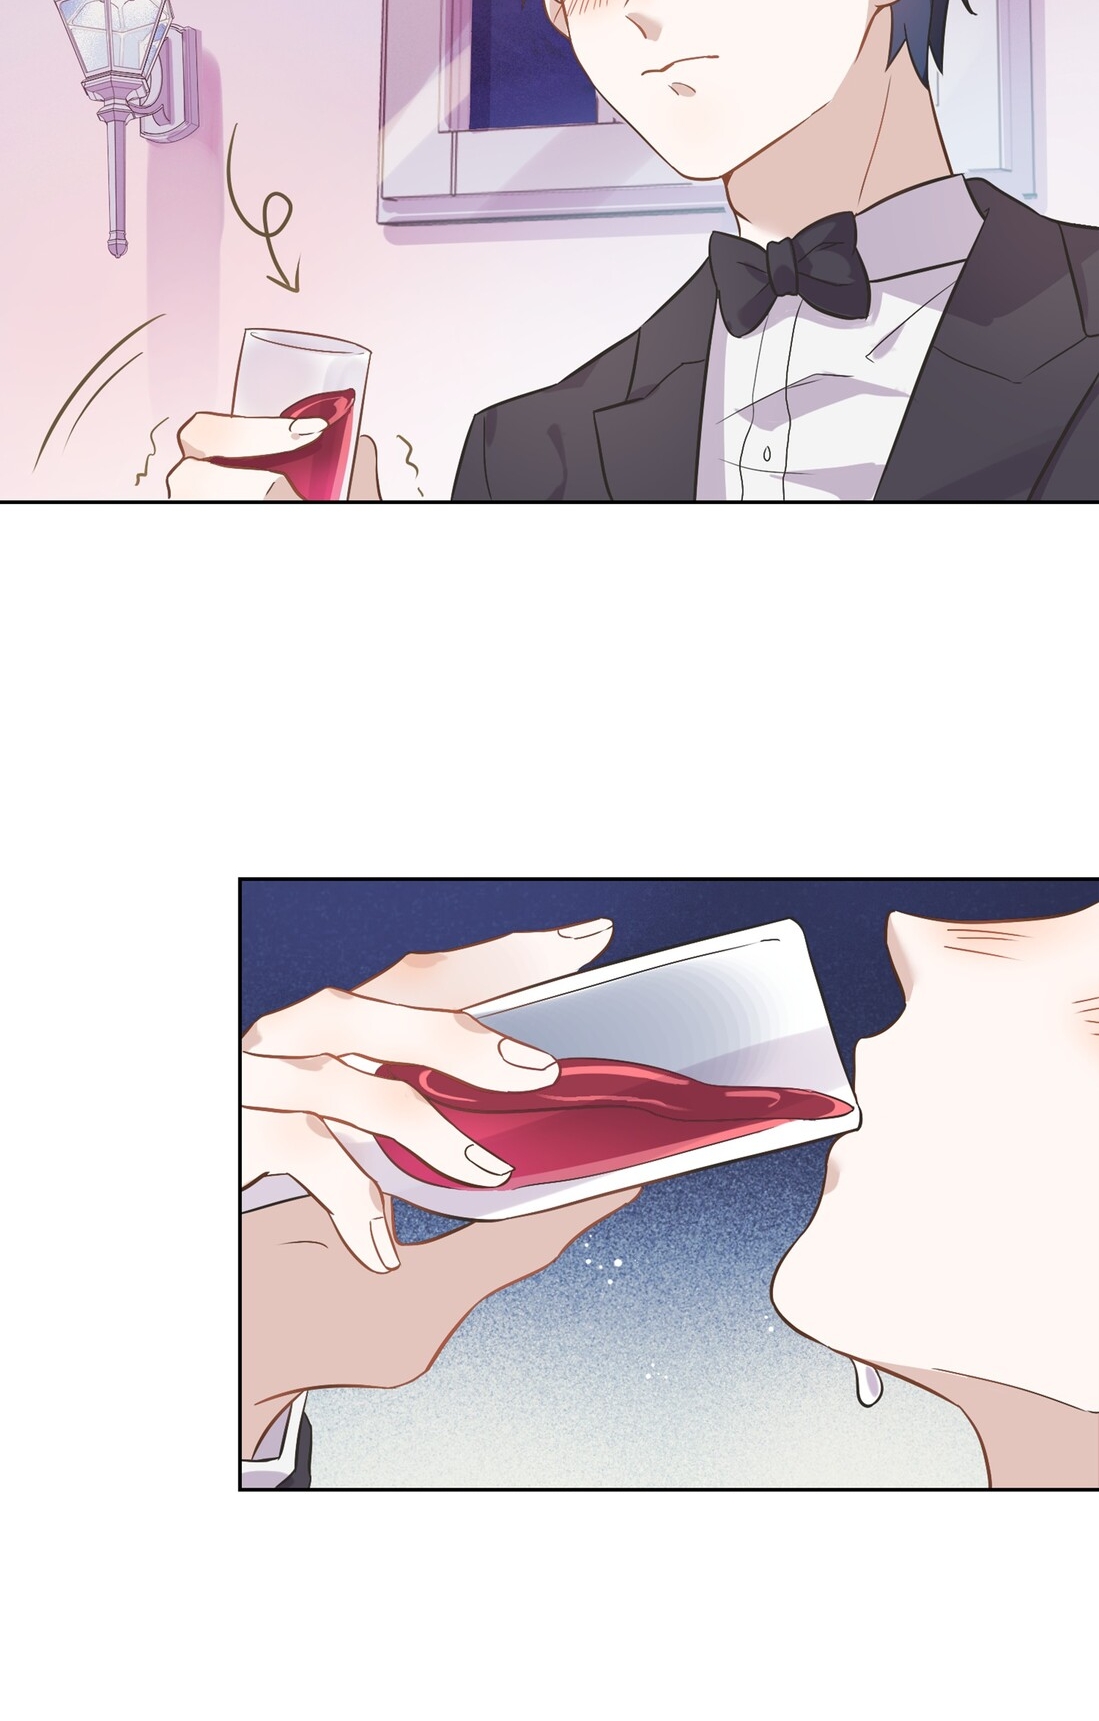 This Boy Got Me Falling Hard Ch. 3 This dessert is so sweet